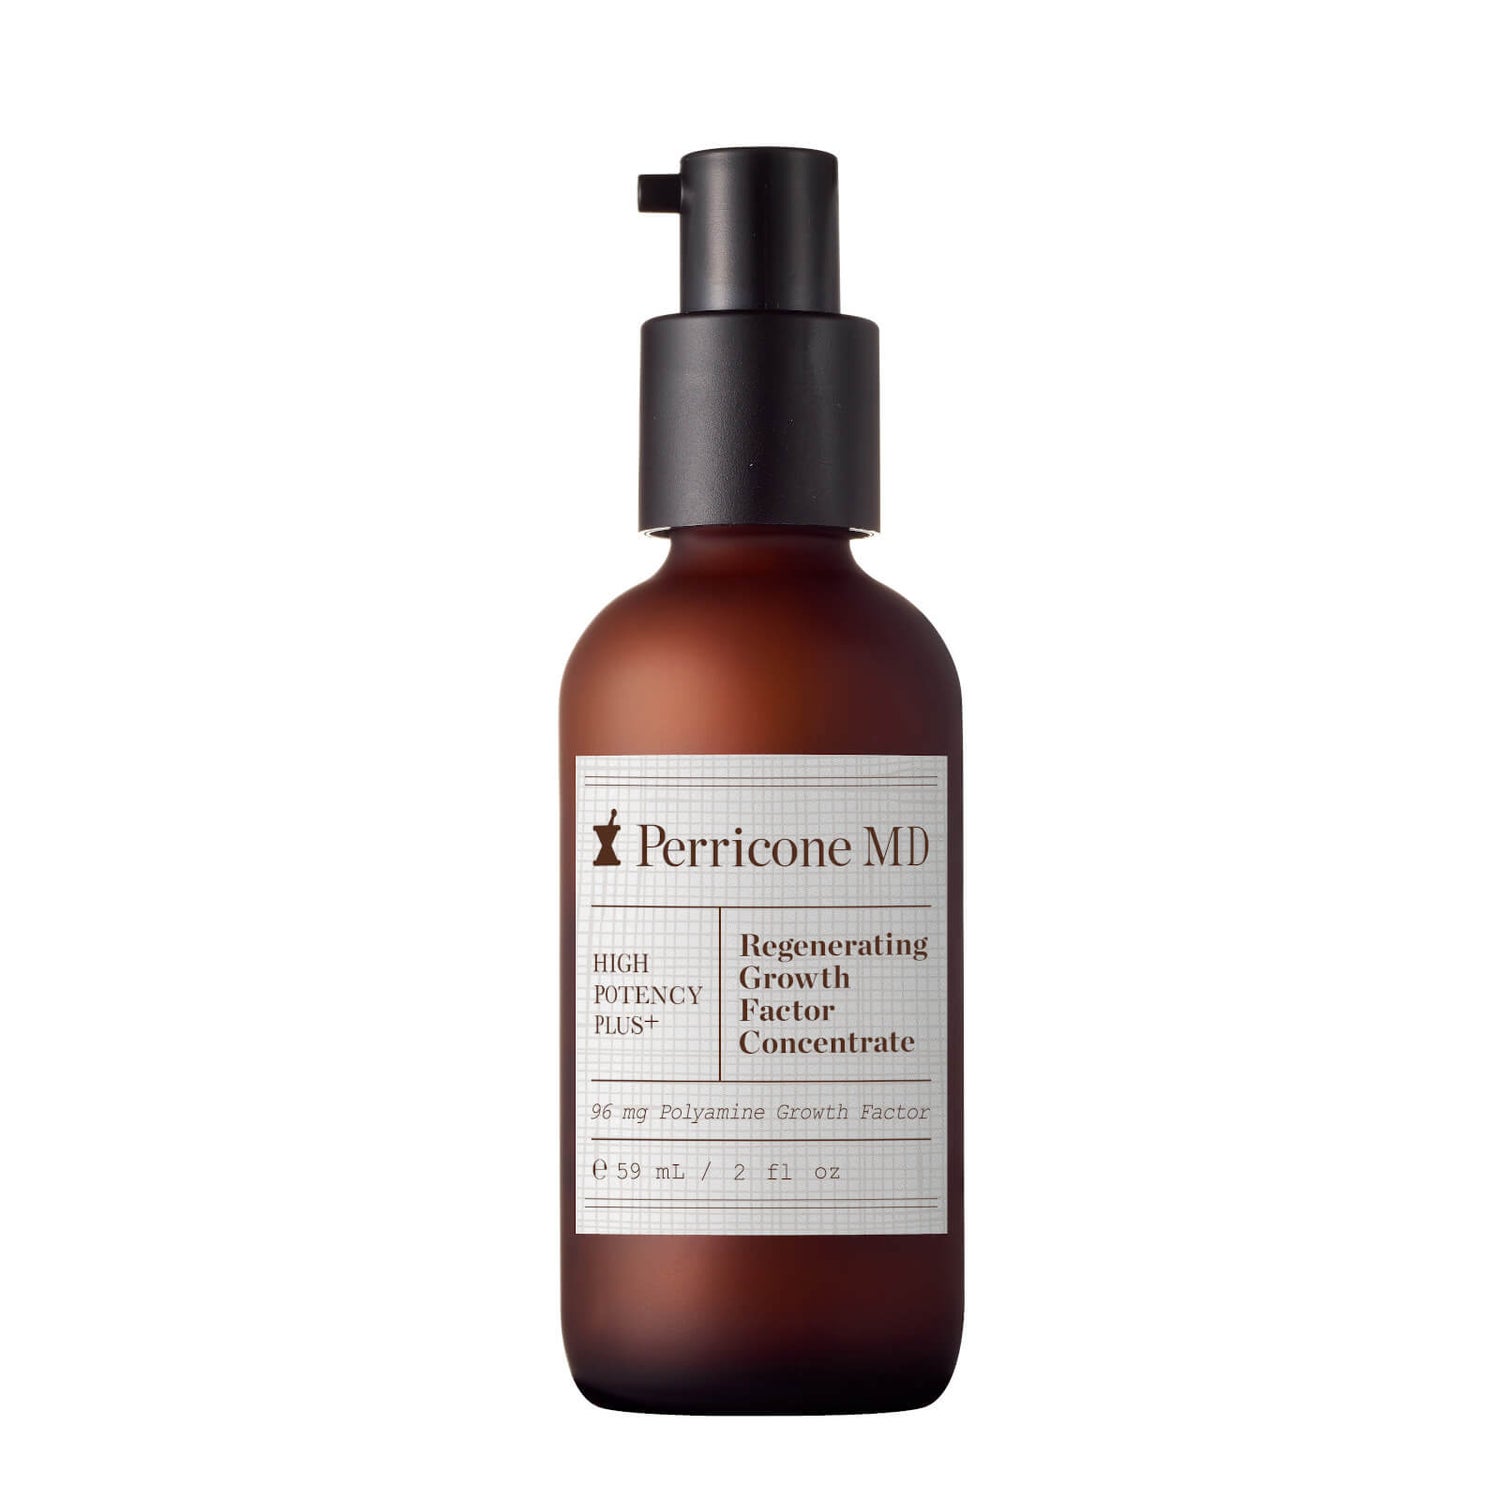 High Potency Plus+ Regenerating Growth Factor Concentrate - Outlet